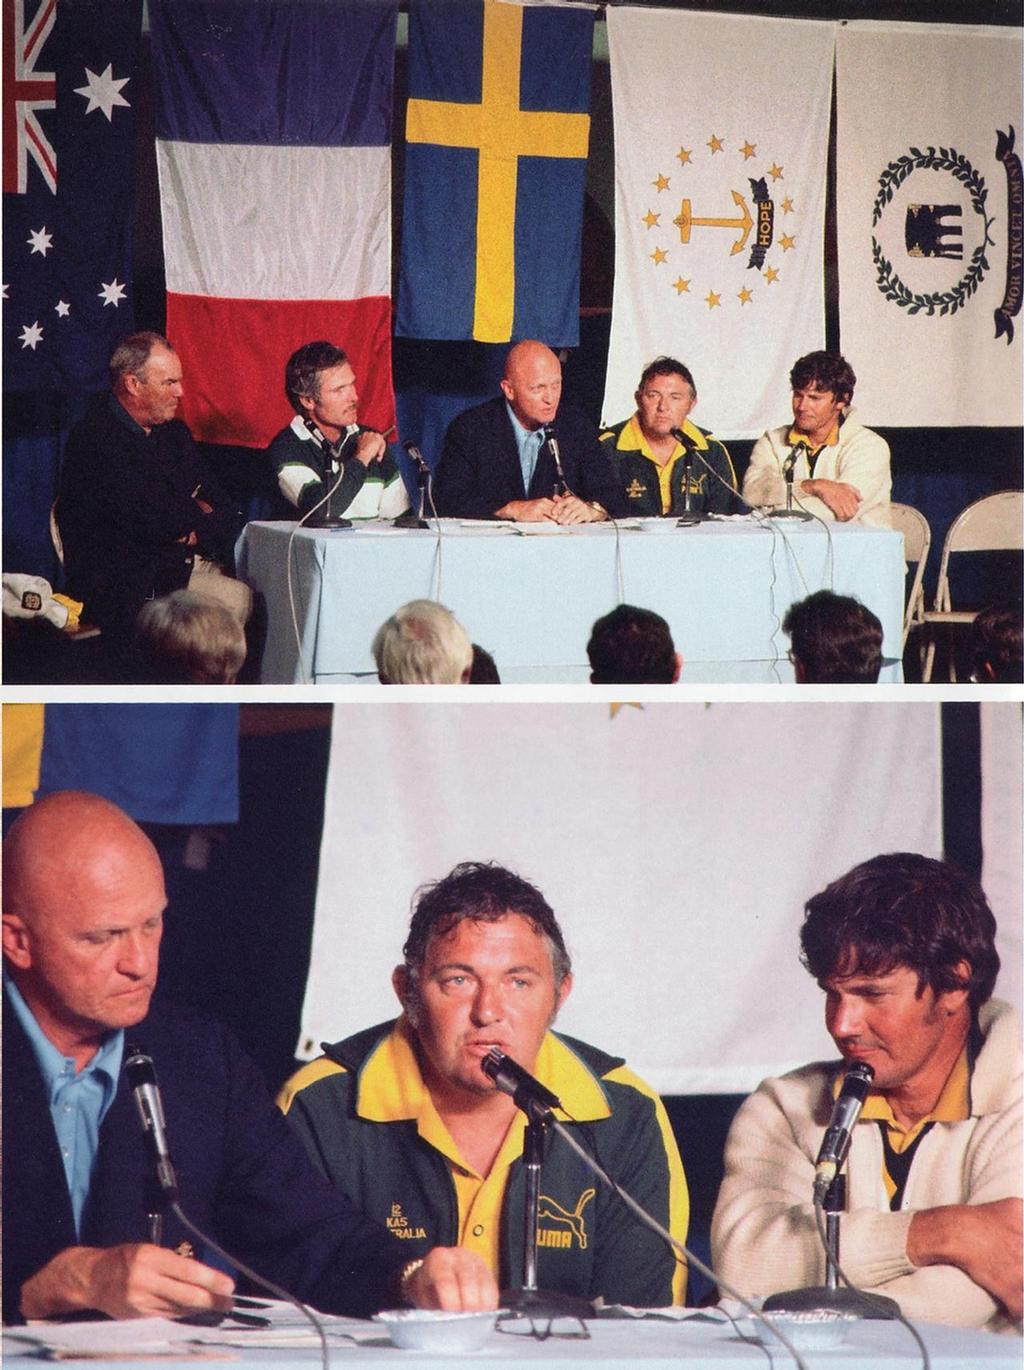 Noel Robins (far right in both images) in the media conference in the State Armoury following the 1980 America’s. Lefty to right in the top images are: Lee Loomis, head of the Courageous syndicate; skipper Ted Turner, moderator, Bill Ficker, Alan Bond and Noel Robins. photo copyright Paul Darling Photography Maritime Productions www.sail-world.com/nz taken at  and featuring the  class